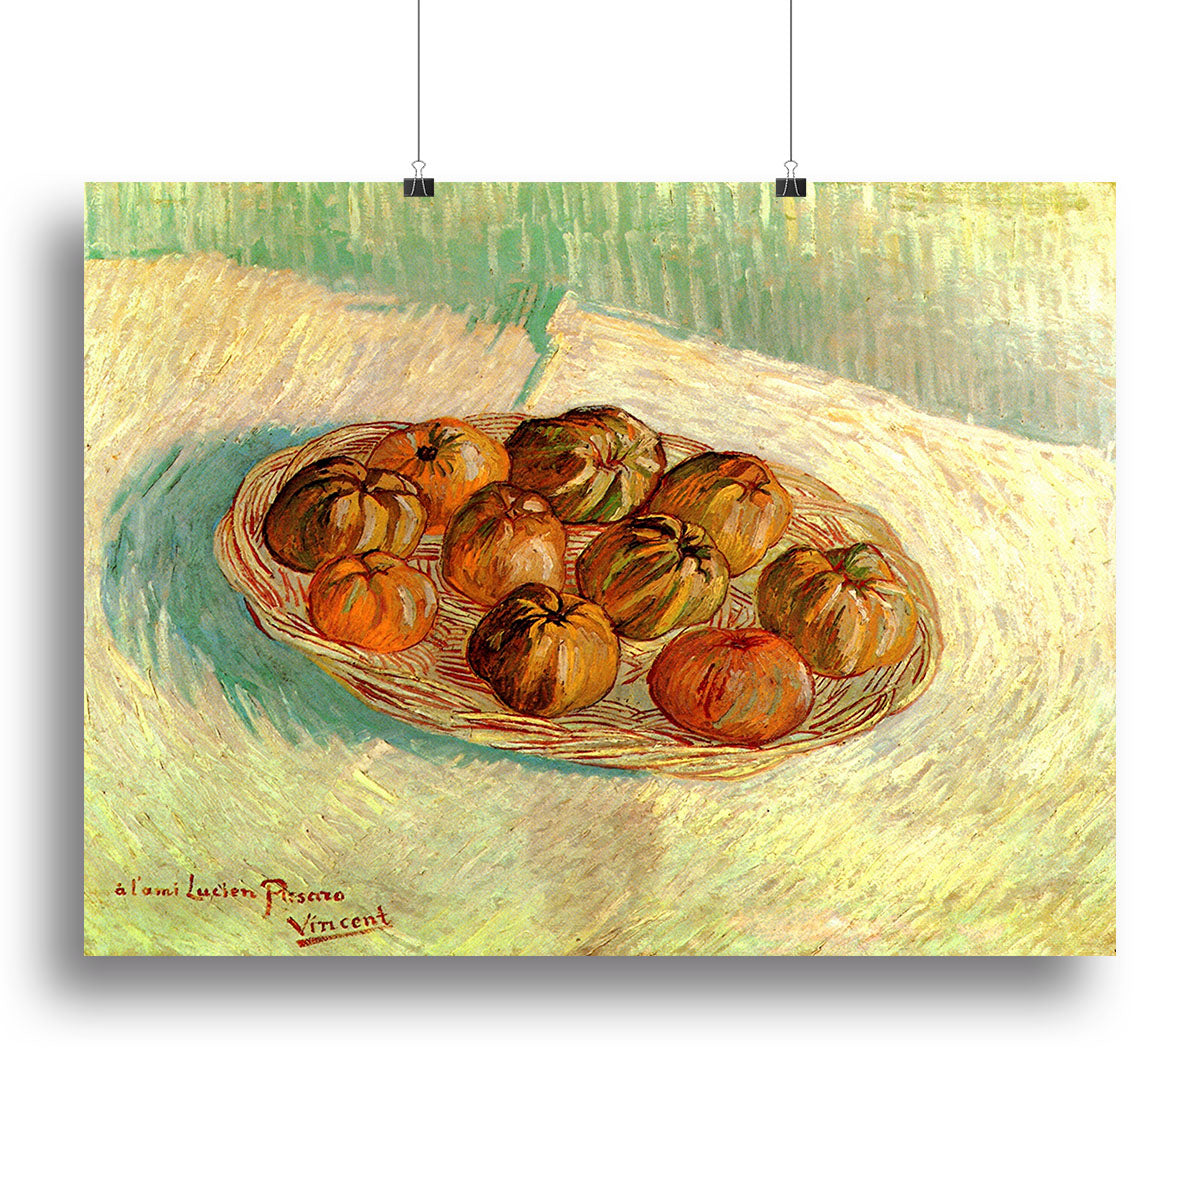 Still Life with Basket of Apples to Lucien Pissarro by Van Gogh Canvas Print or Poster - Canvas Art Rocks - 2